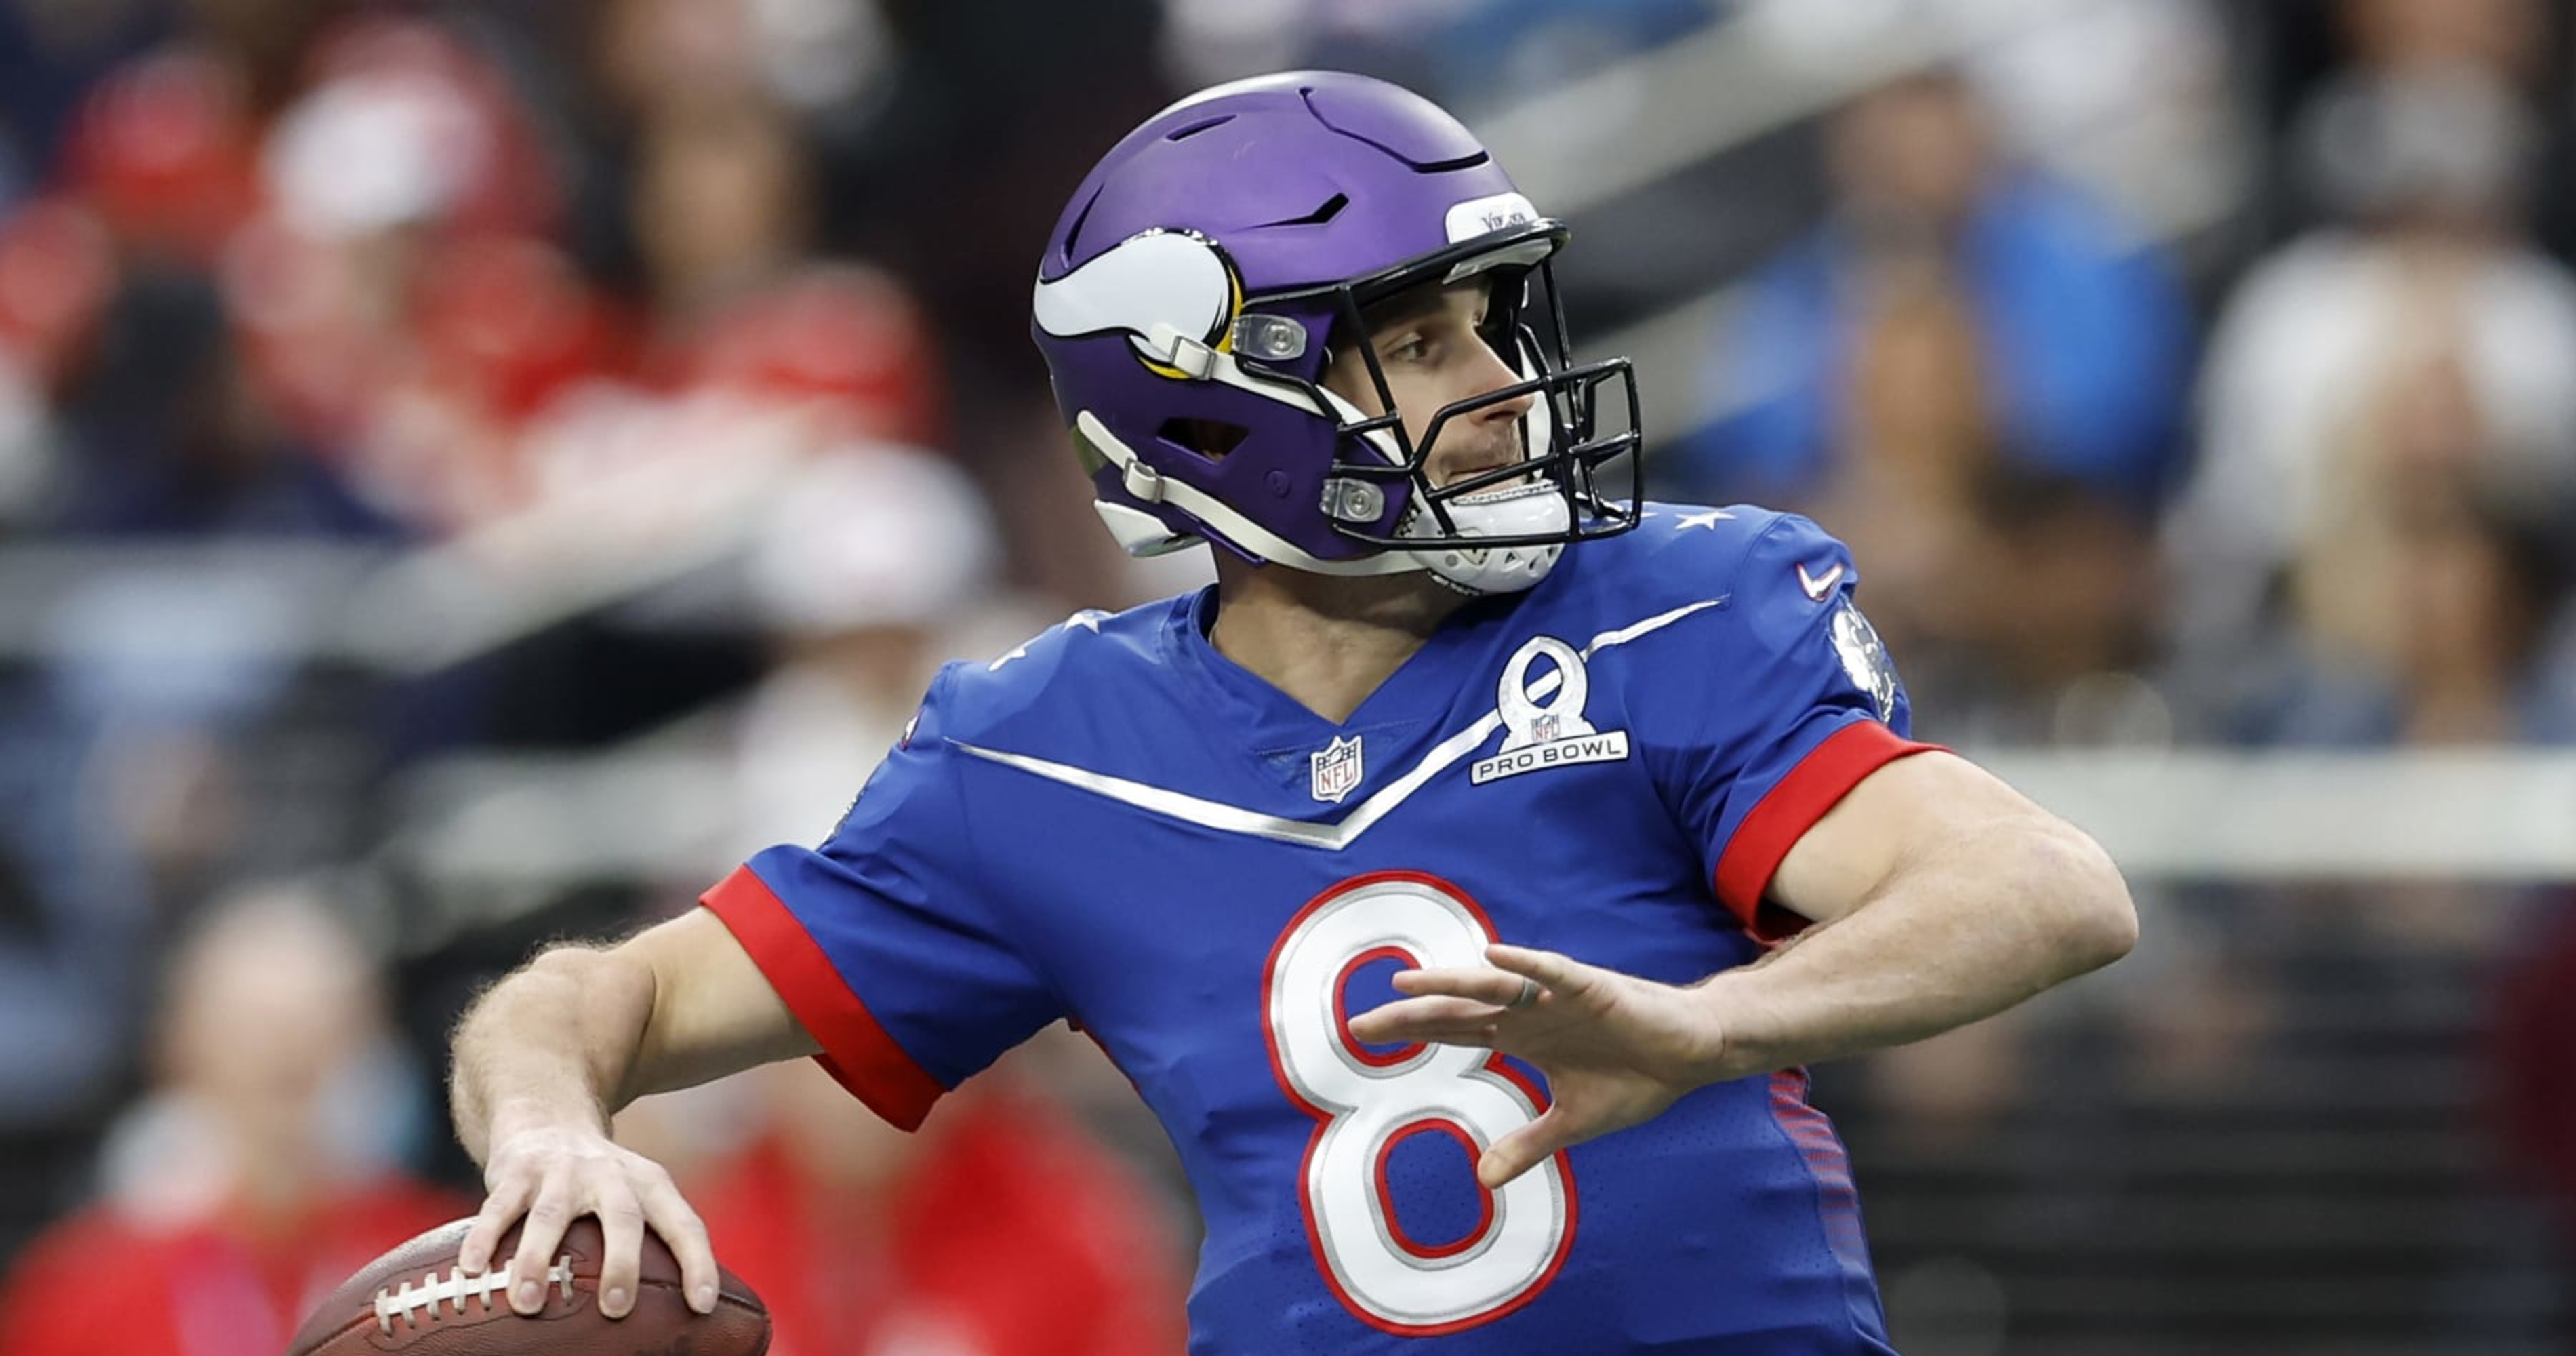 Vikings' QB Kirk Cousins in Tom Brady company with incredible feat